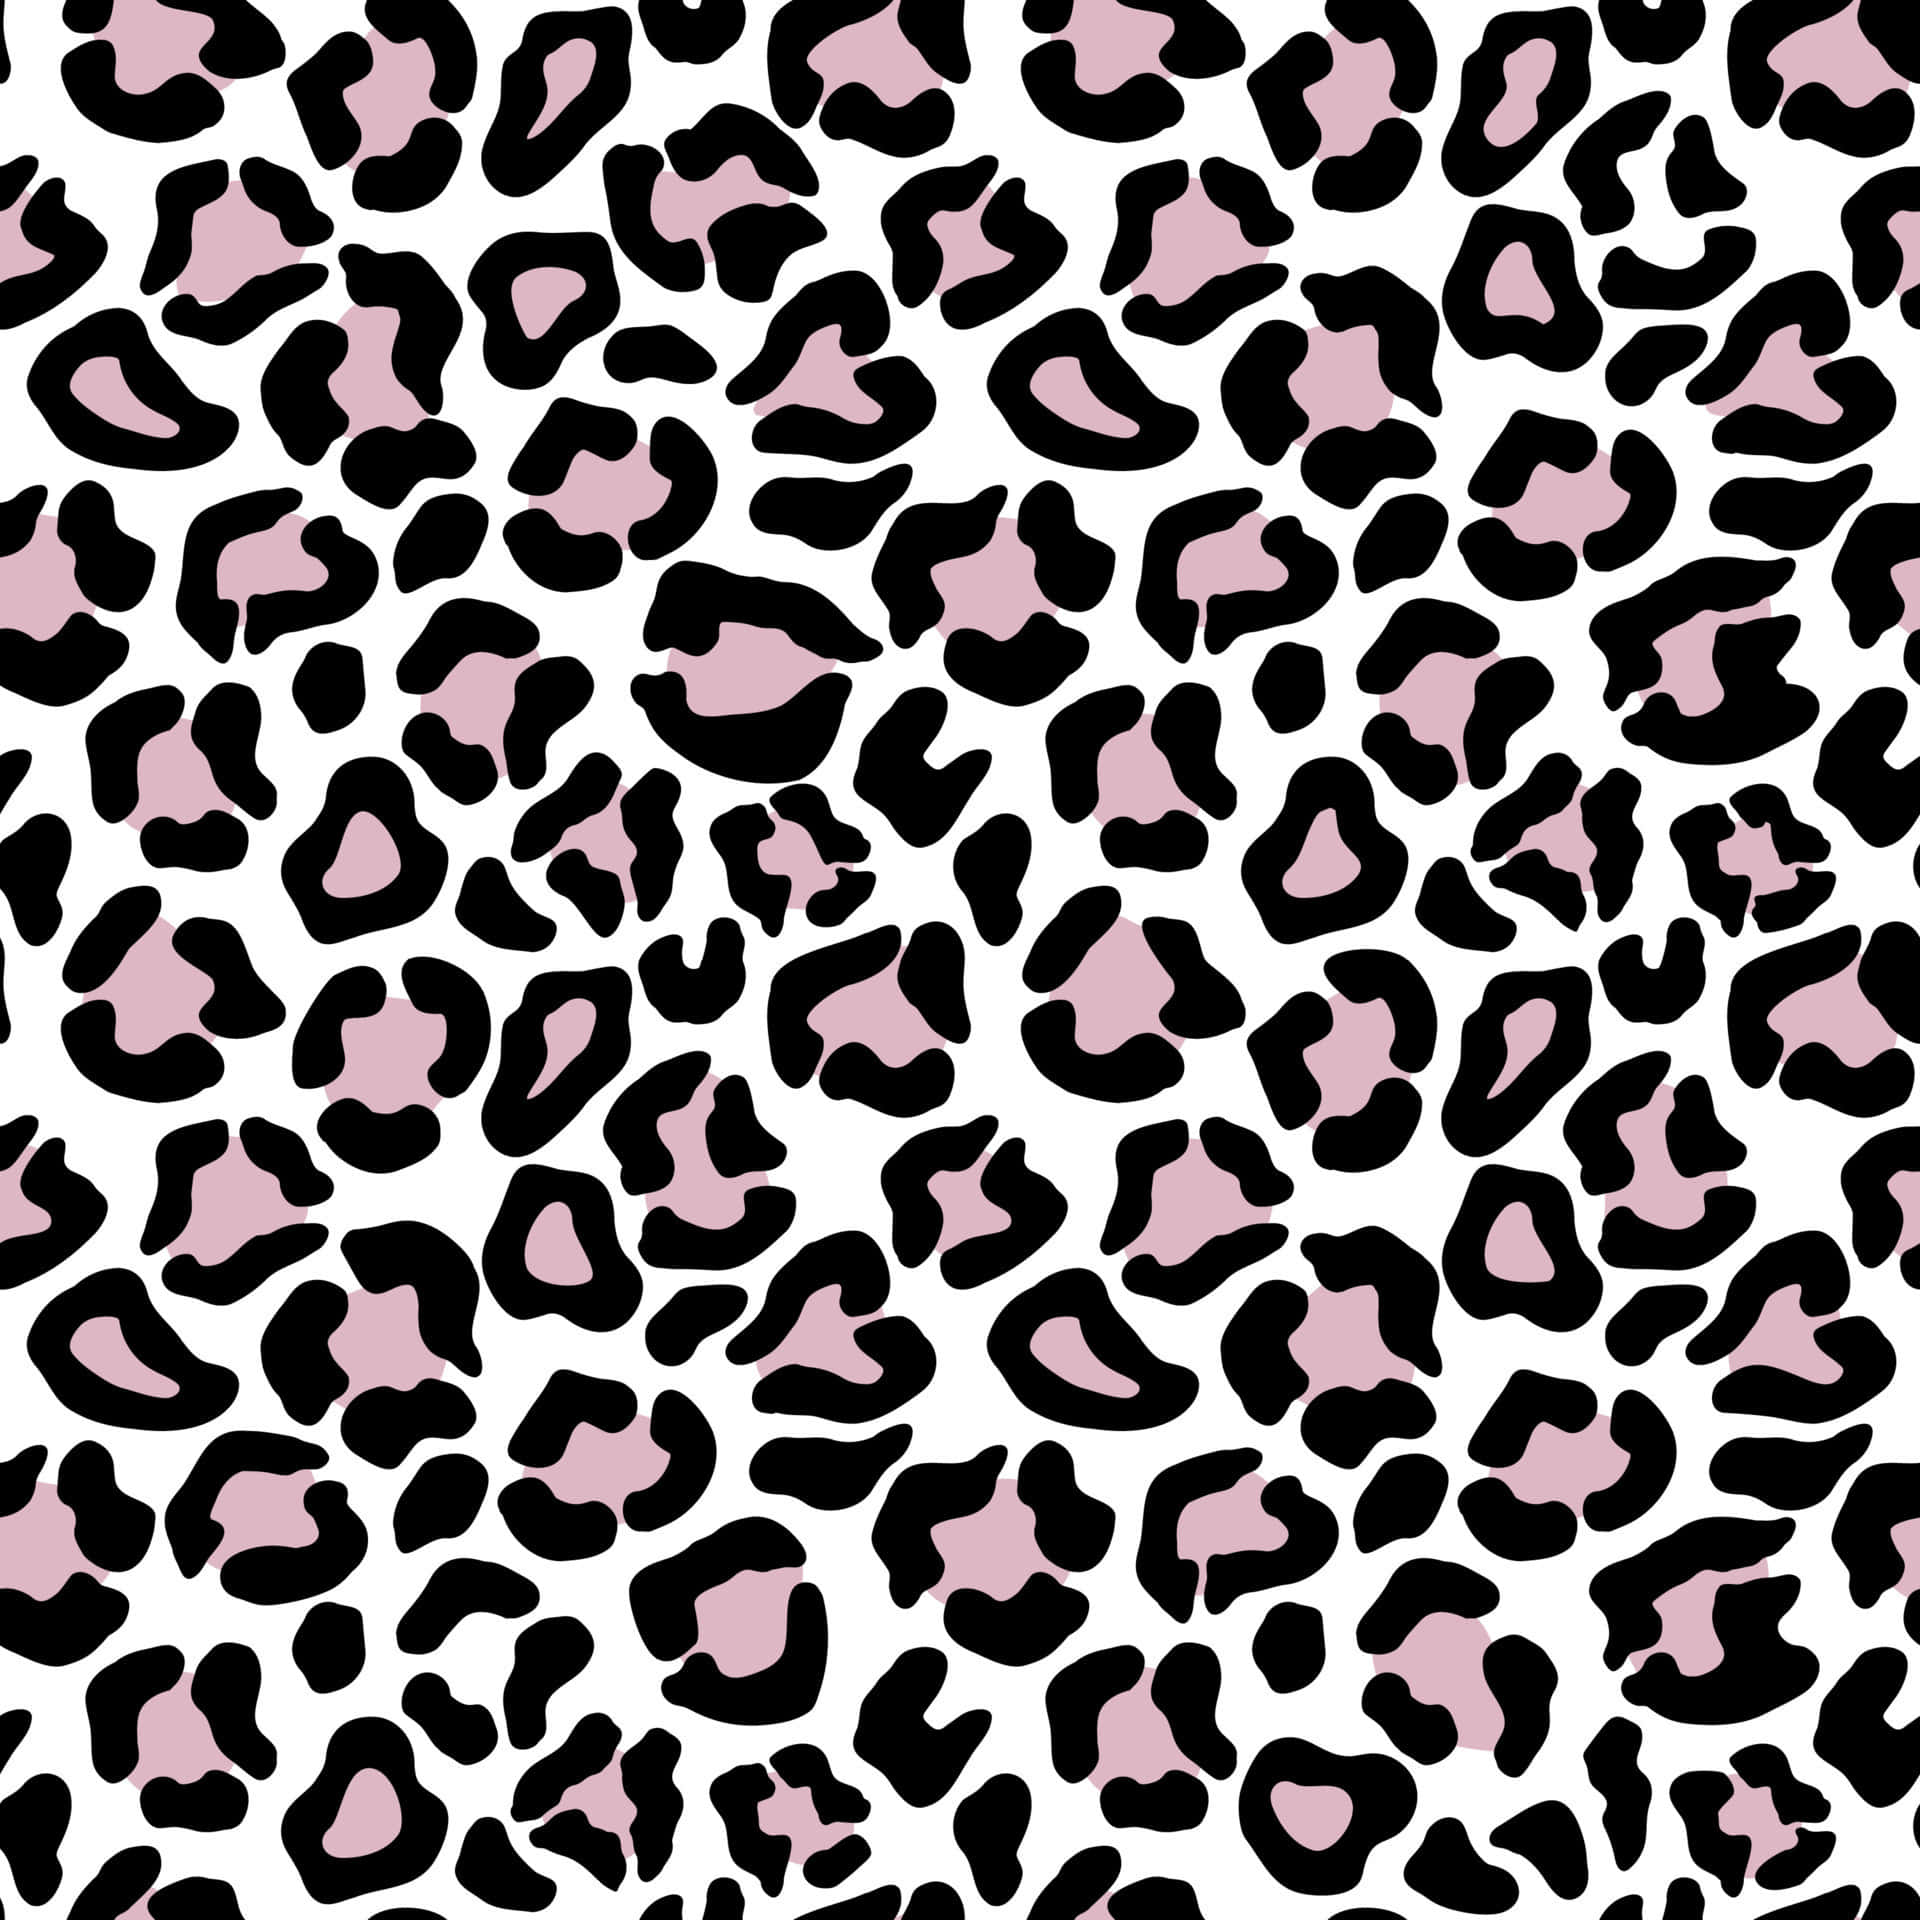 Download A Leopard Print Pattern With Pink And Black Spots Wallpaper ...